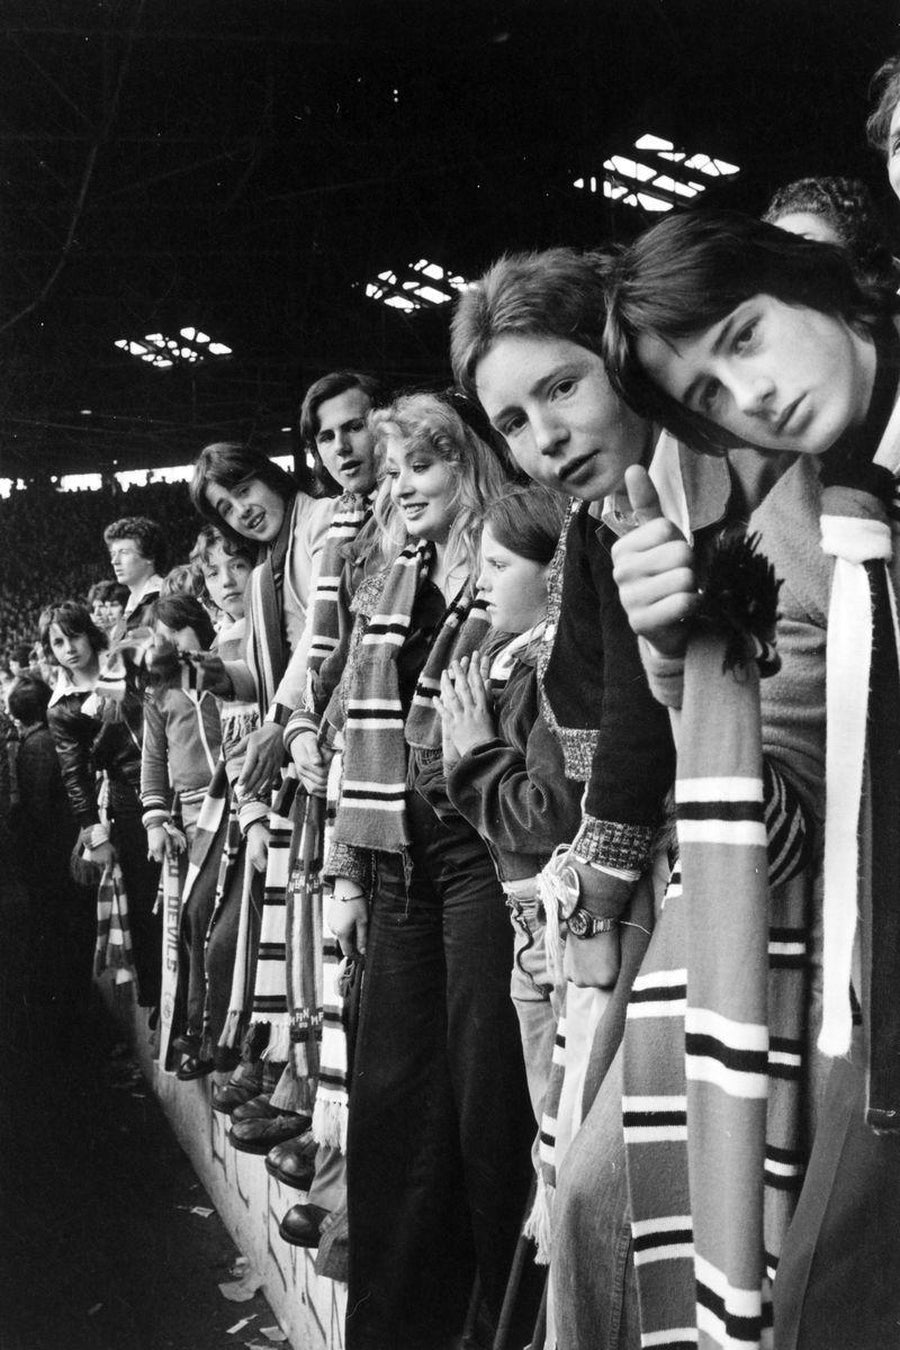 Manchester United Fans on the Terraces by Iain S. P. Reid, c. 1977